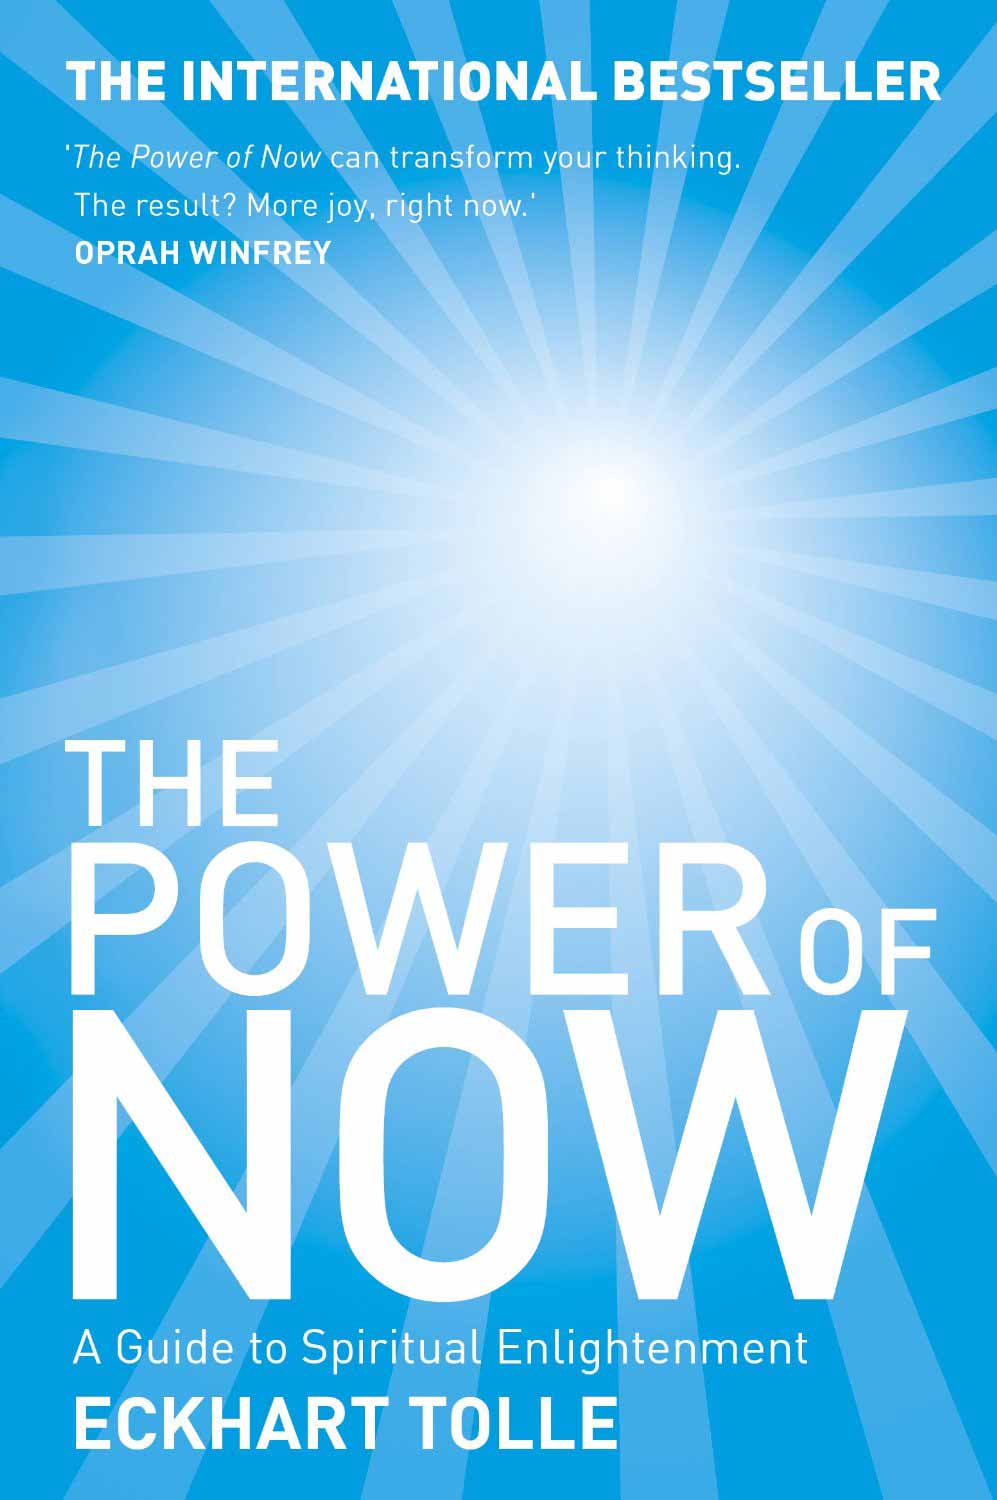 the power of now - book cover